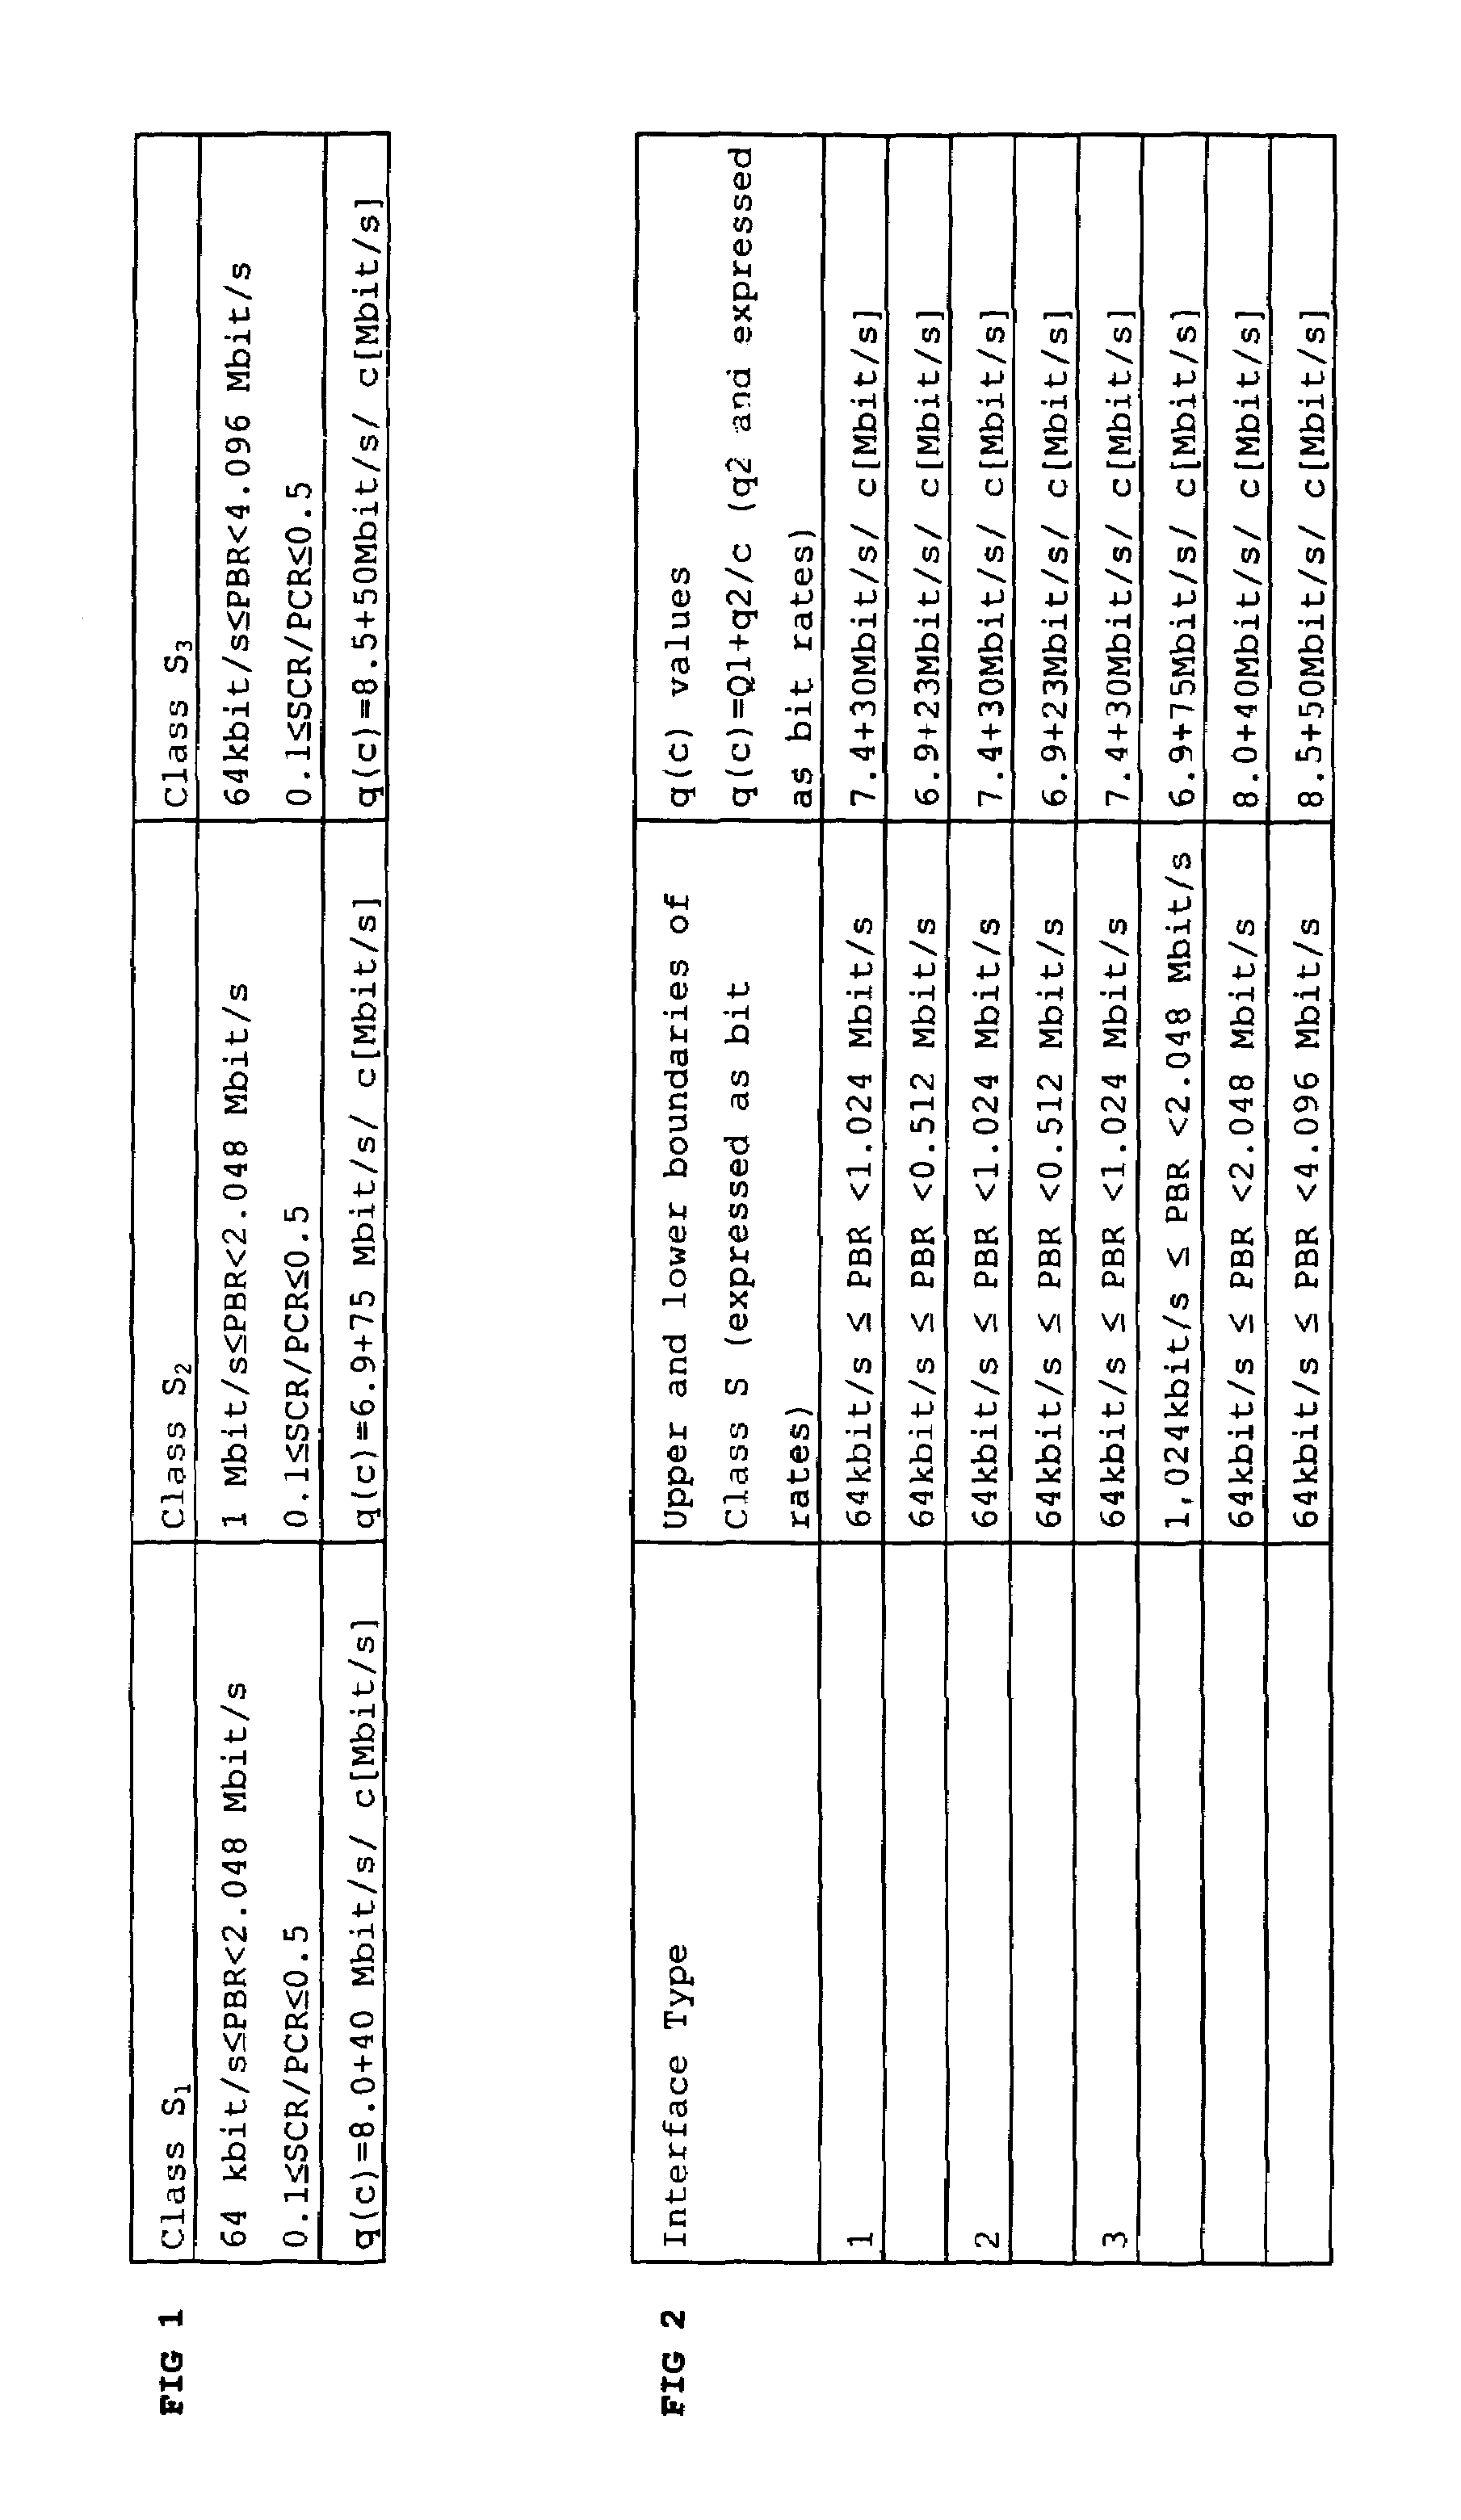 Statistic multiplexing of ATM-connections